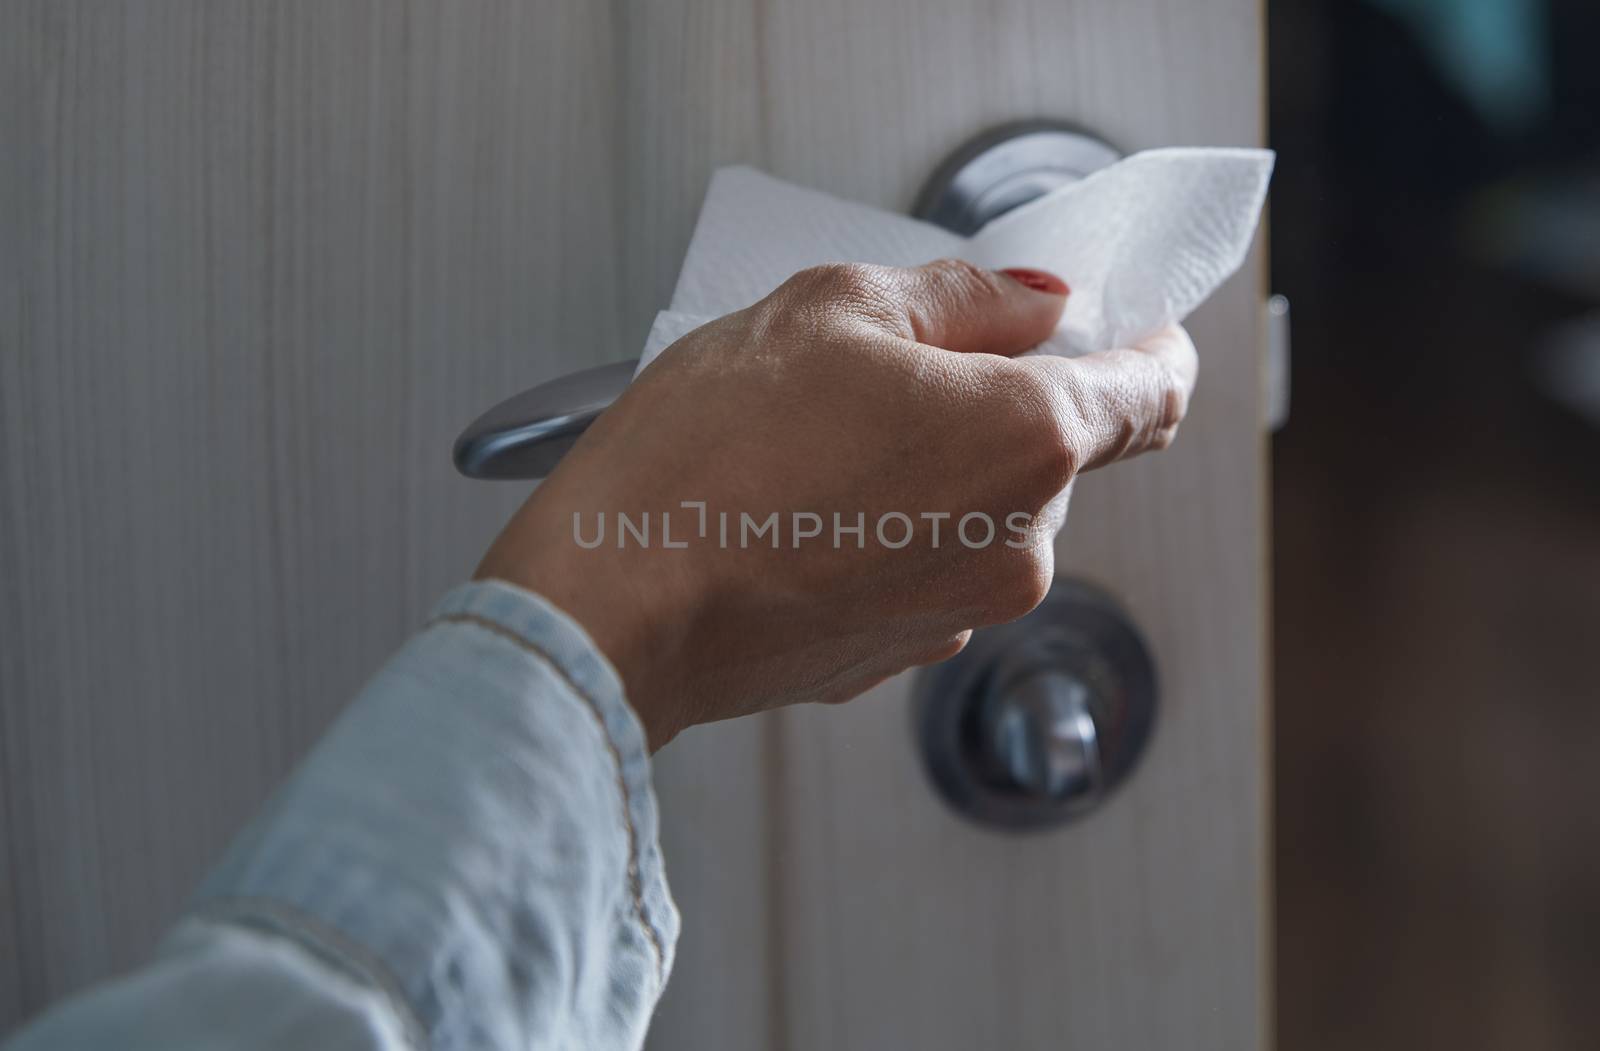 Woman cleaning the door handle with disinfecting wipe by Novic